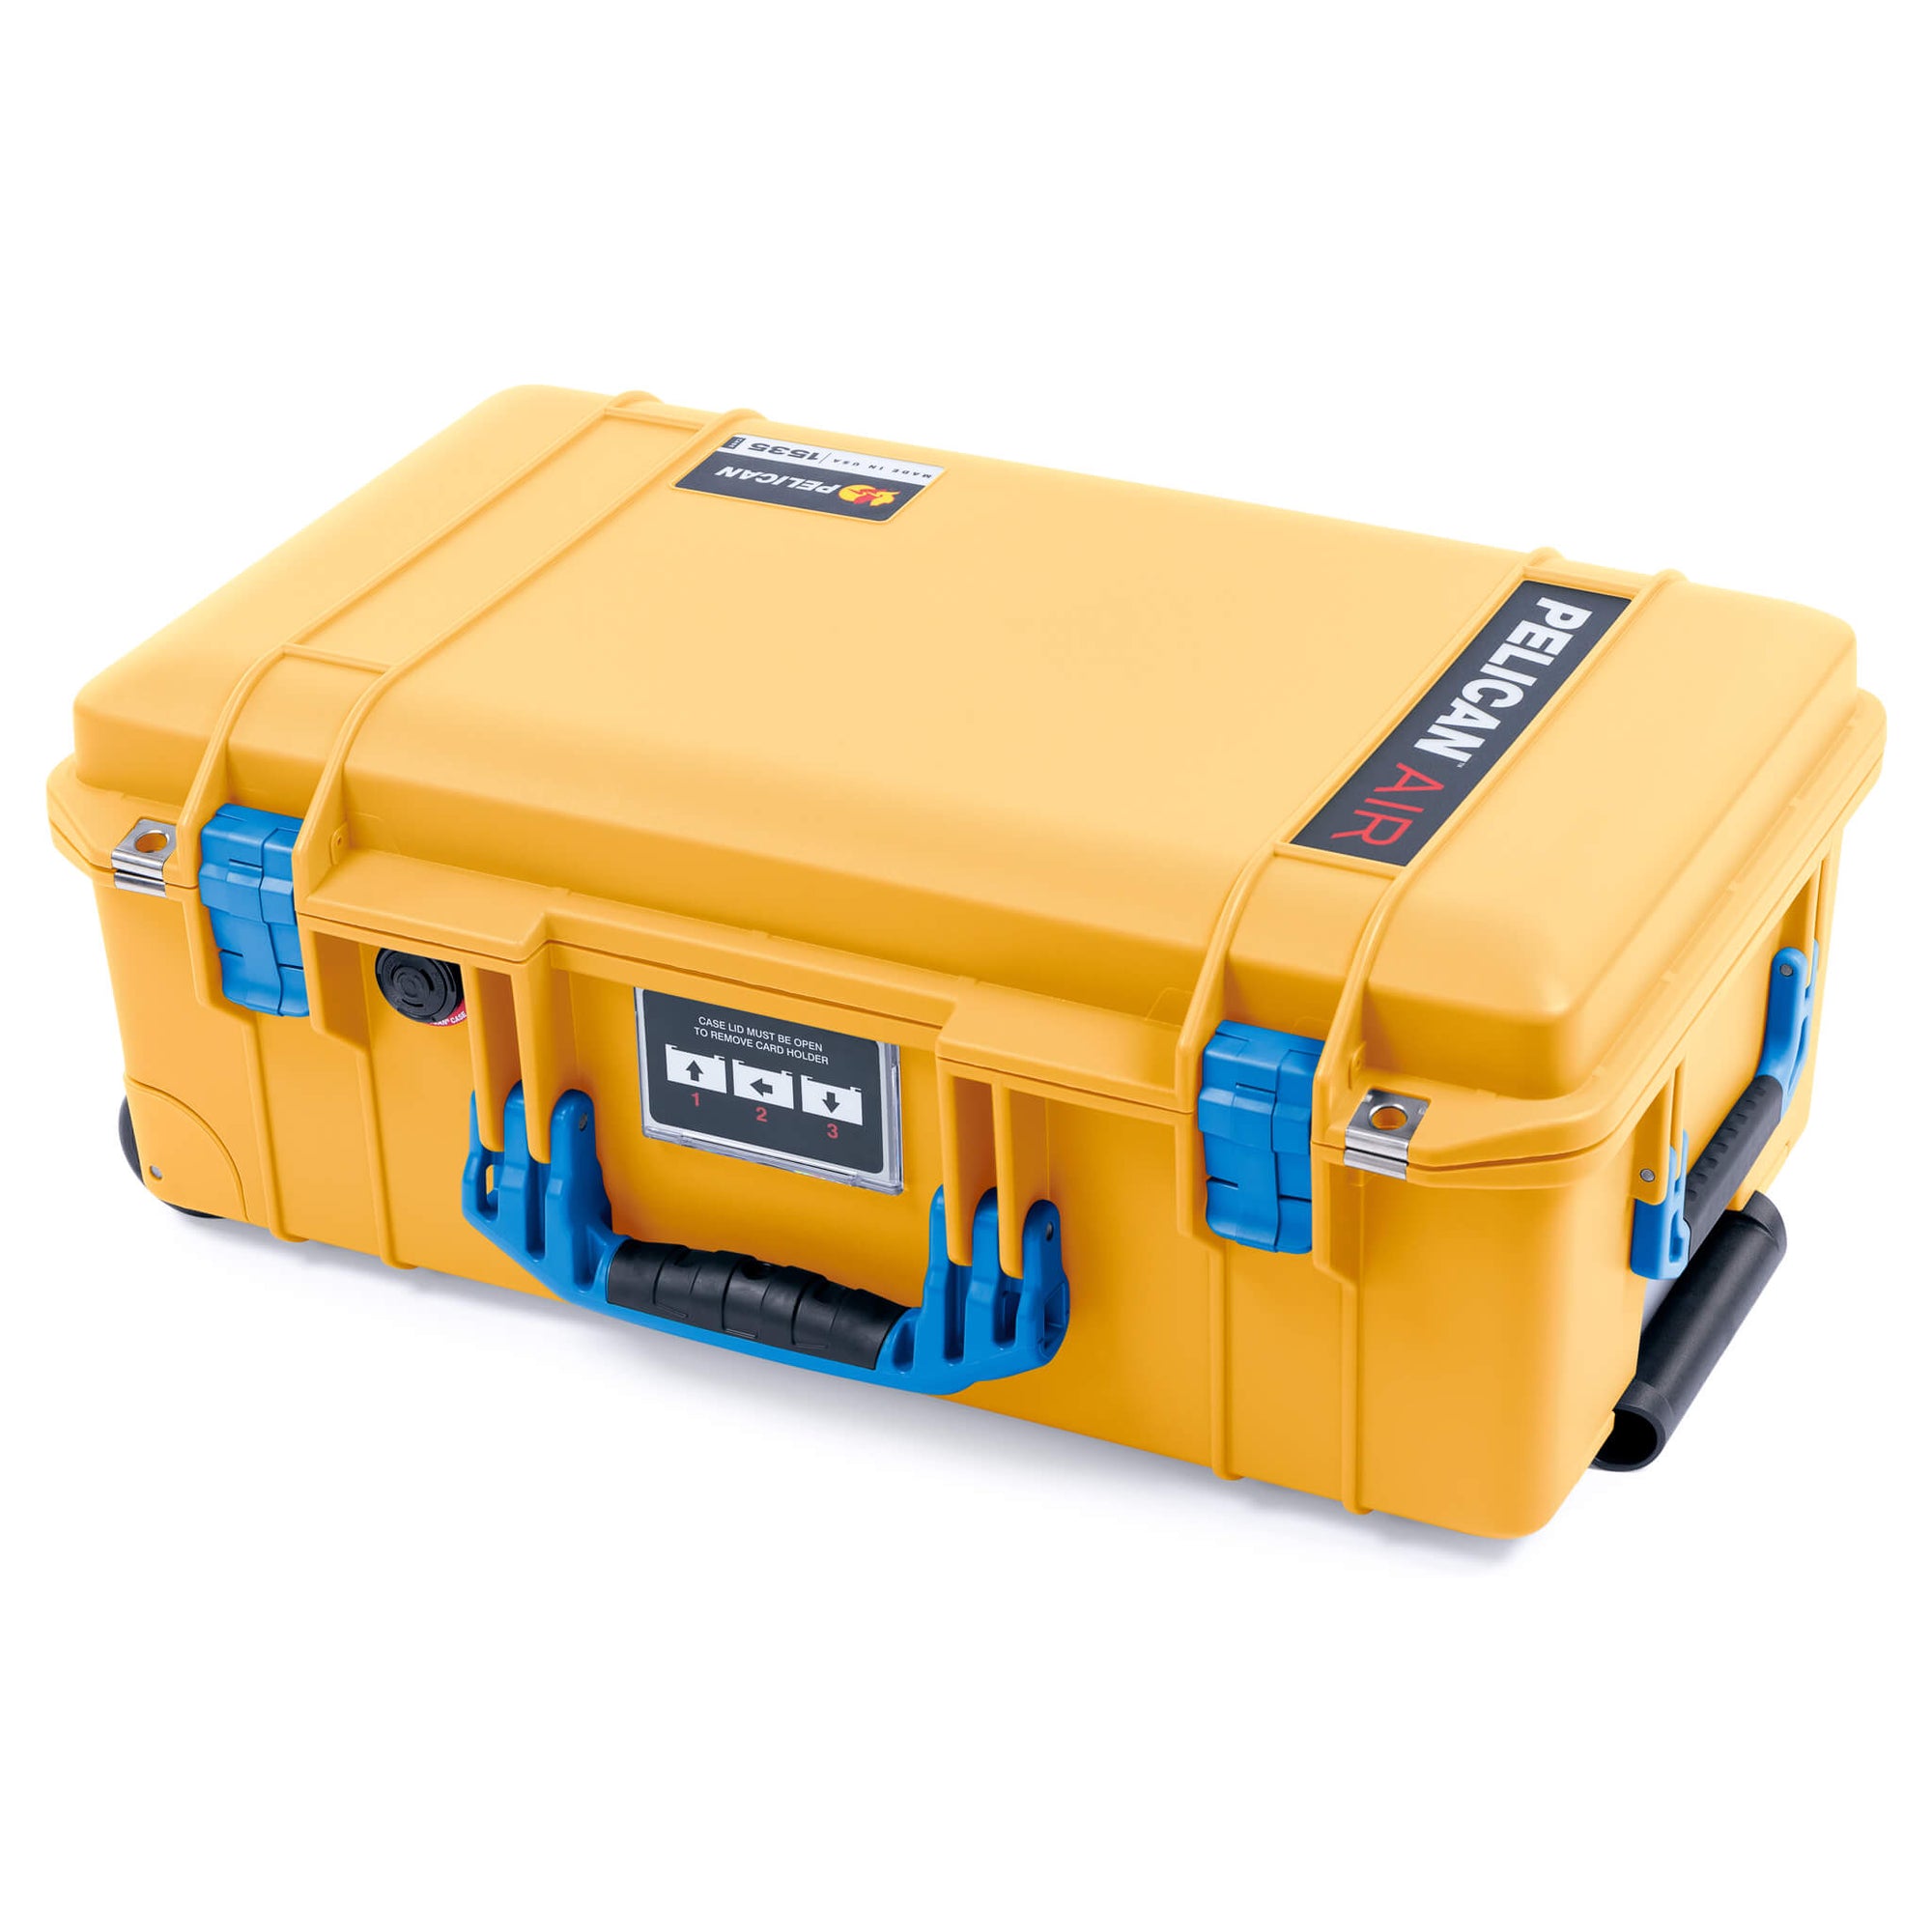 Pelican 1535 Air Case, Yellow with Blue Handles & Latches